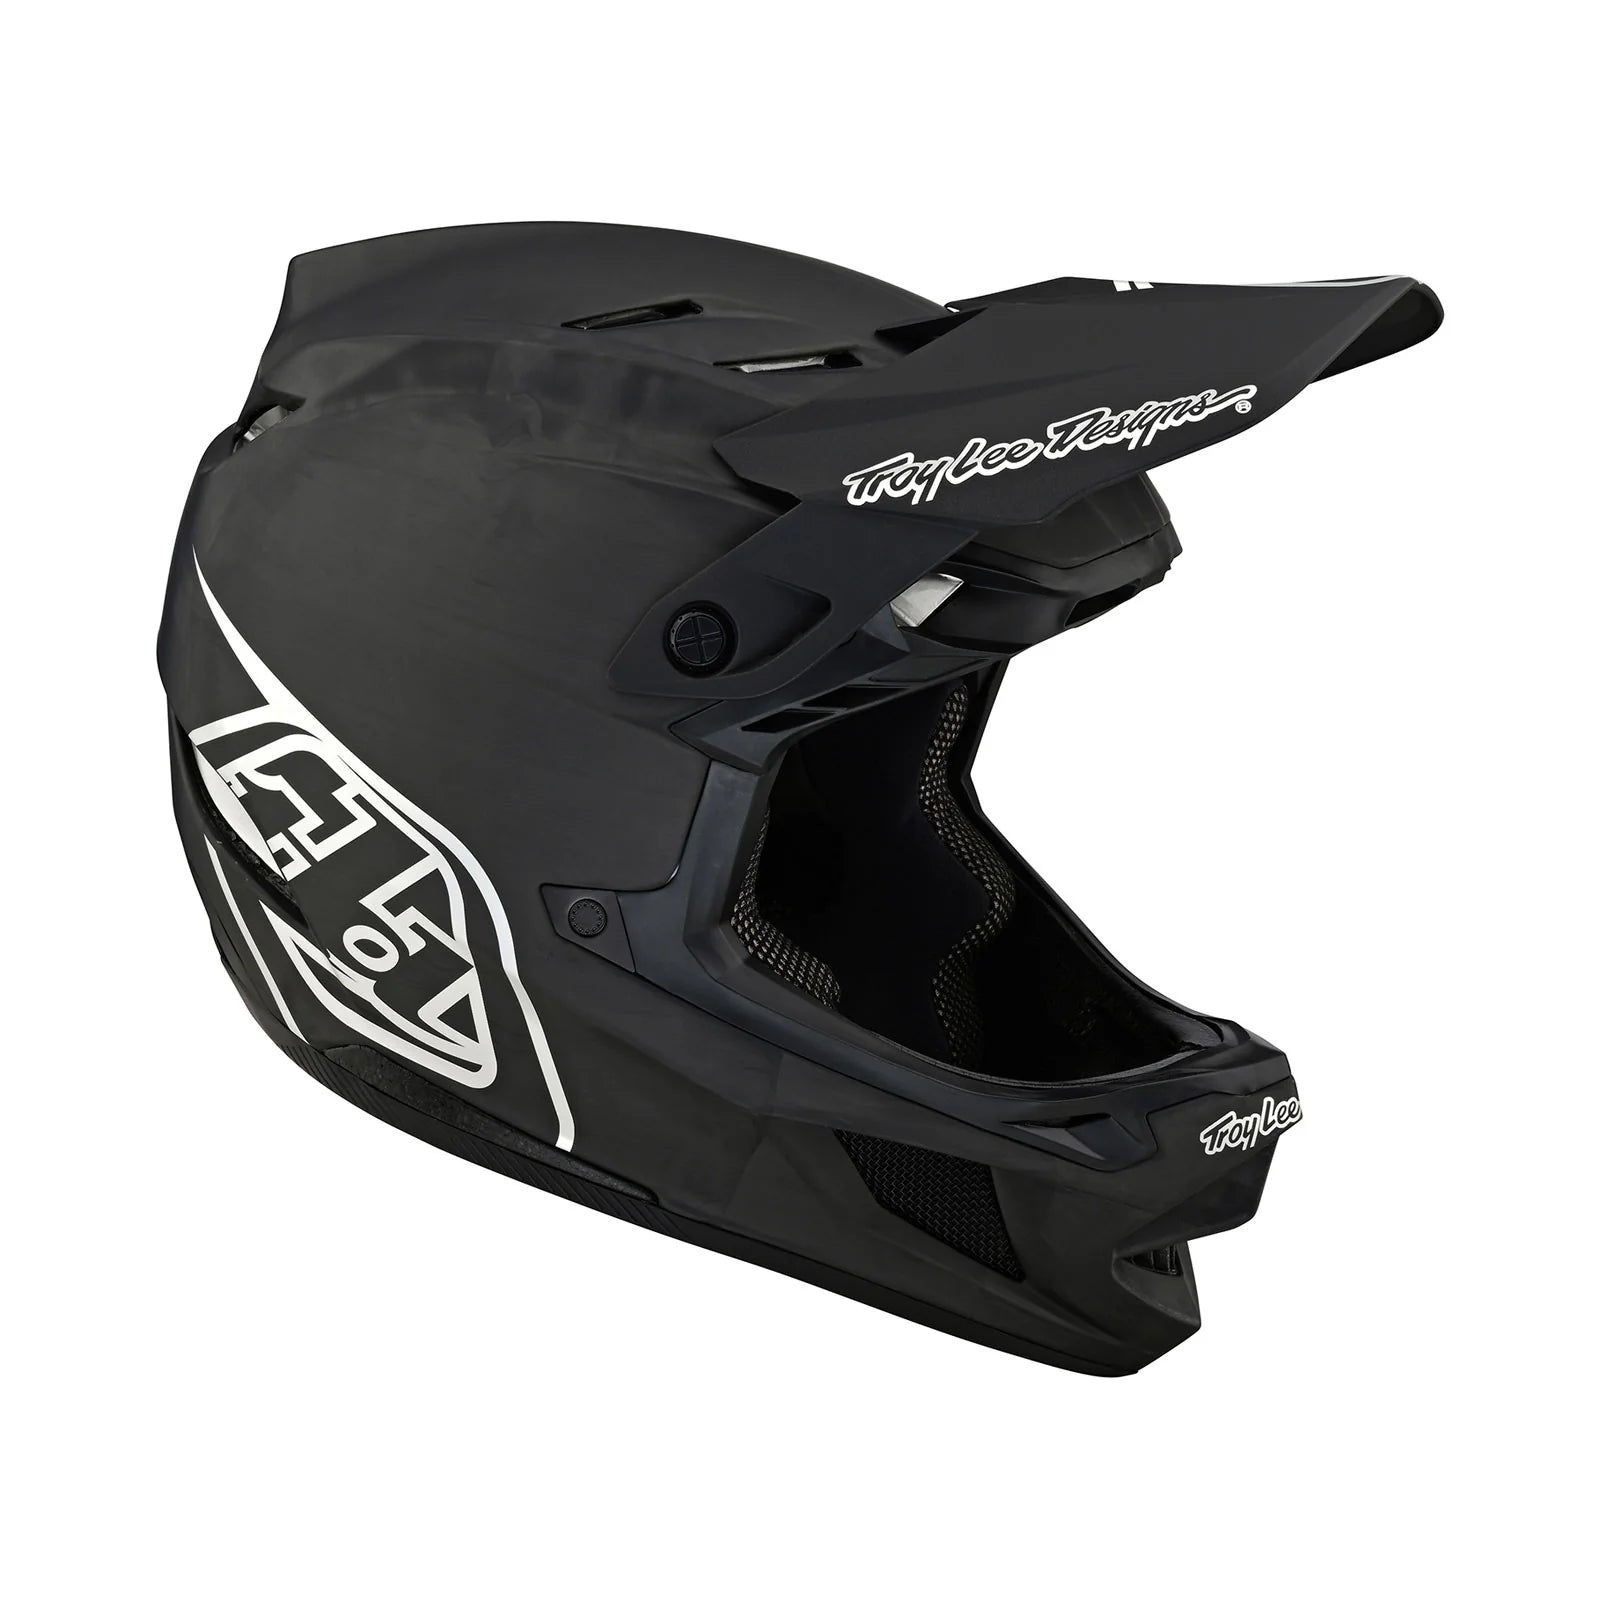 A TLD D4 AS Carbon W/MIPS Helmet Black/Silver with a white logo and MIPS Brain Protection System.